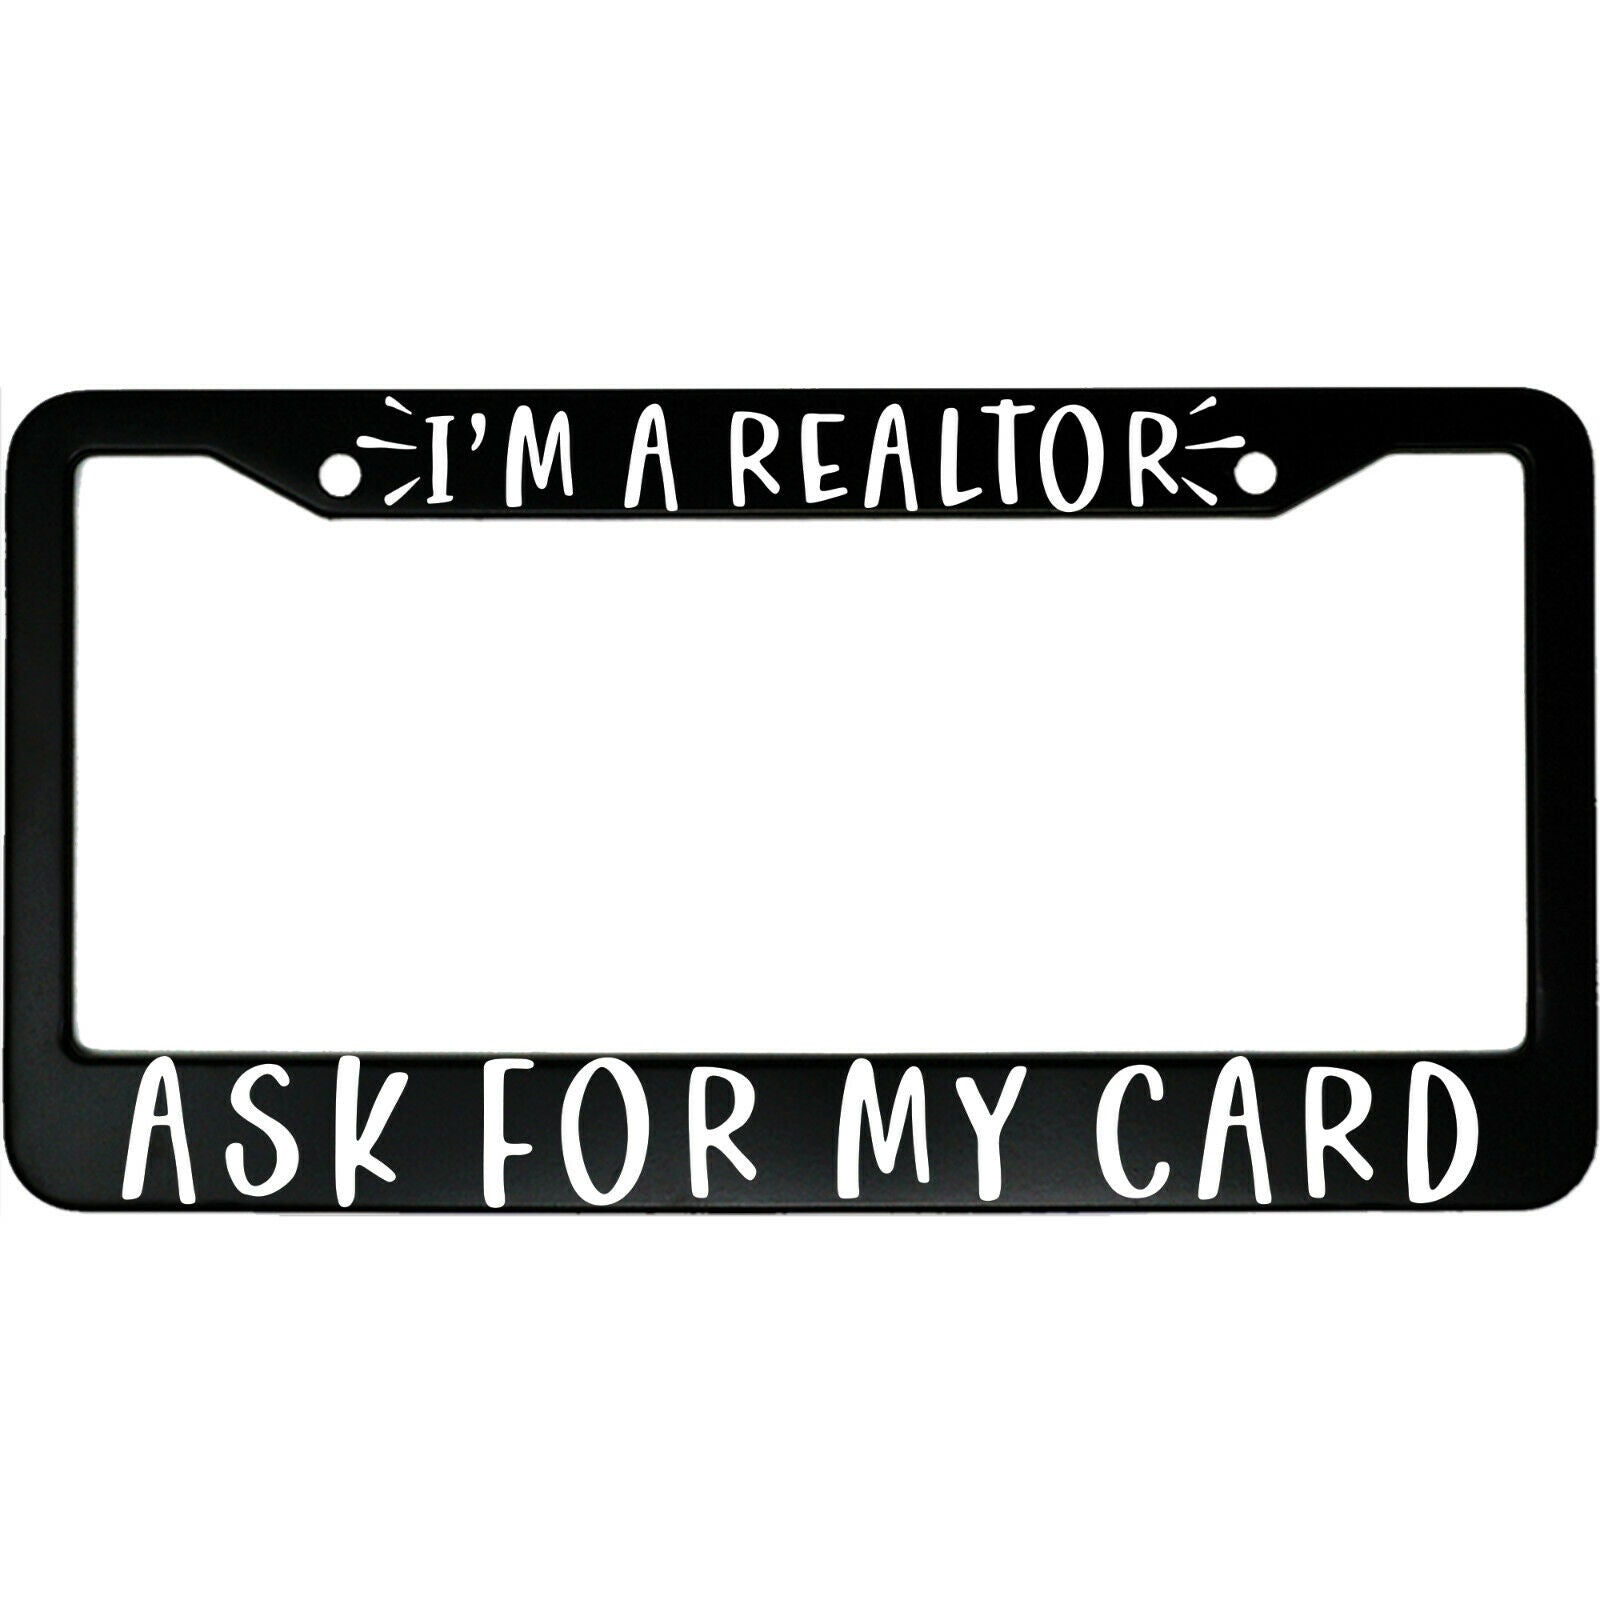 I'm A Realtor Ask For My Card